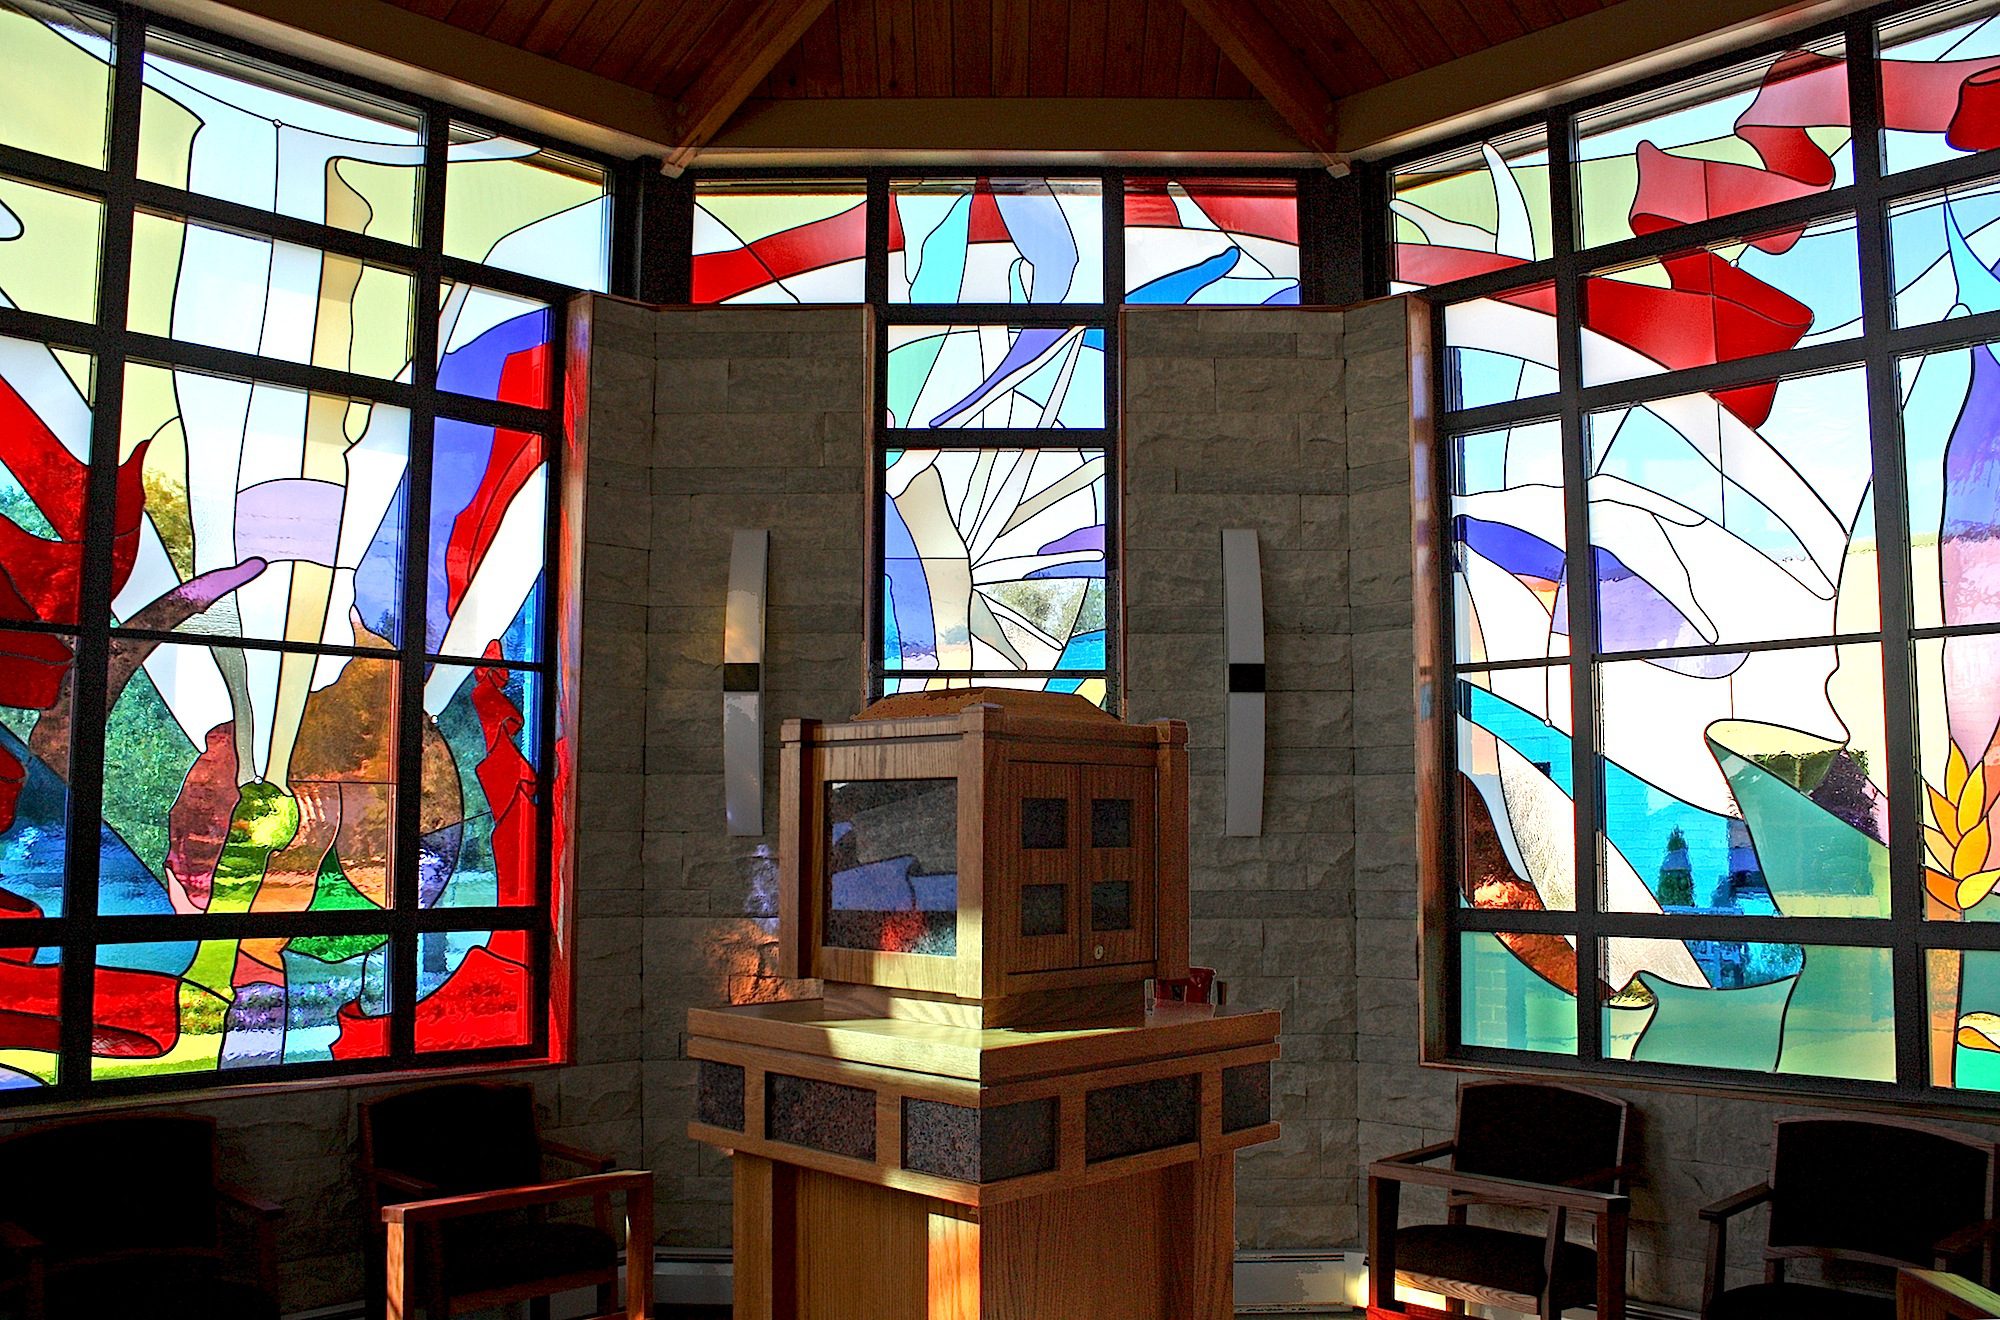 stained glass behind altar